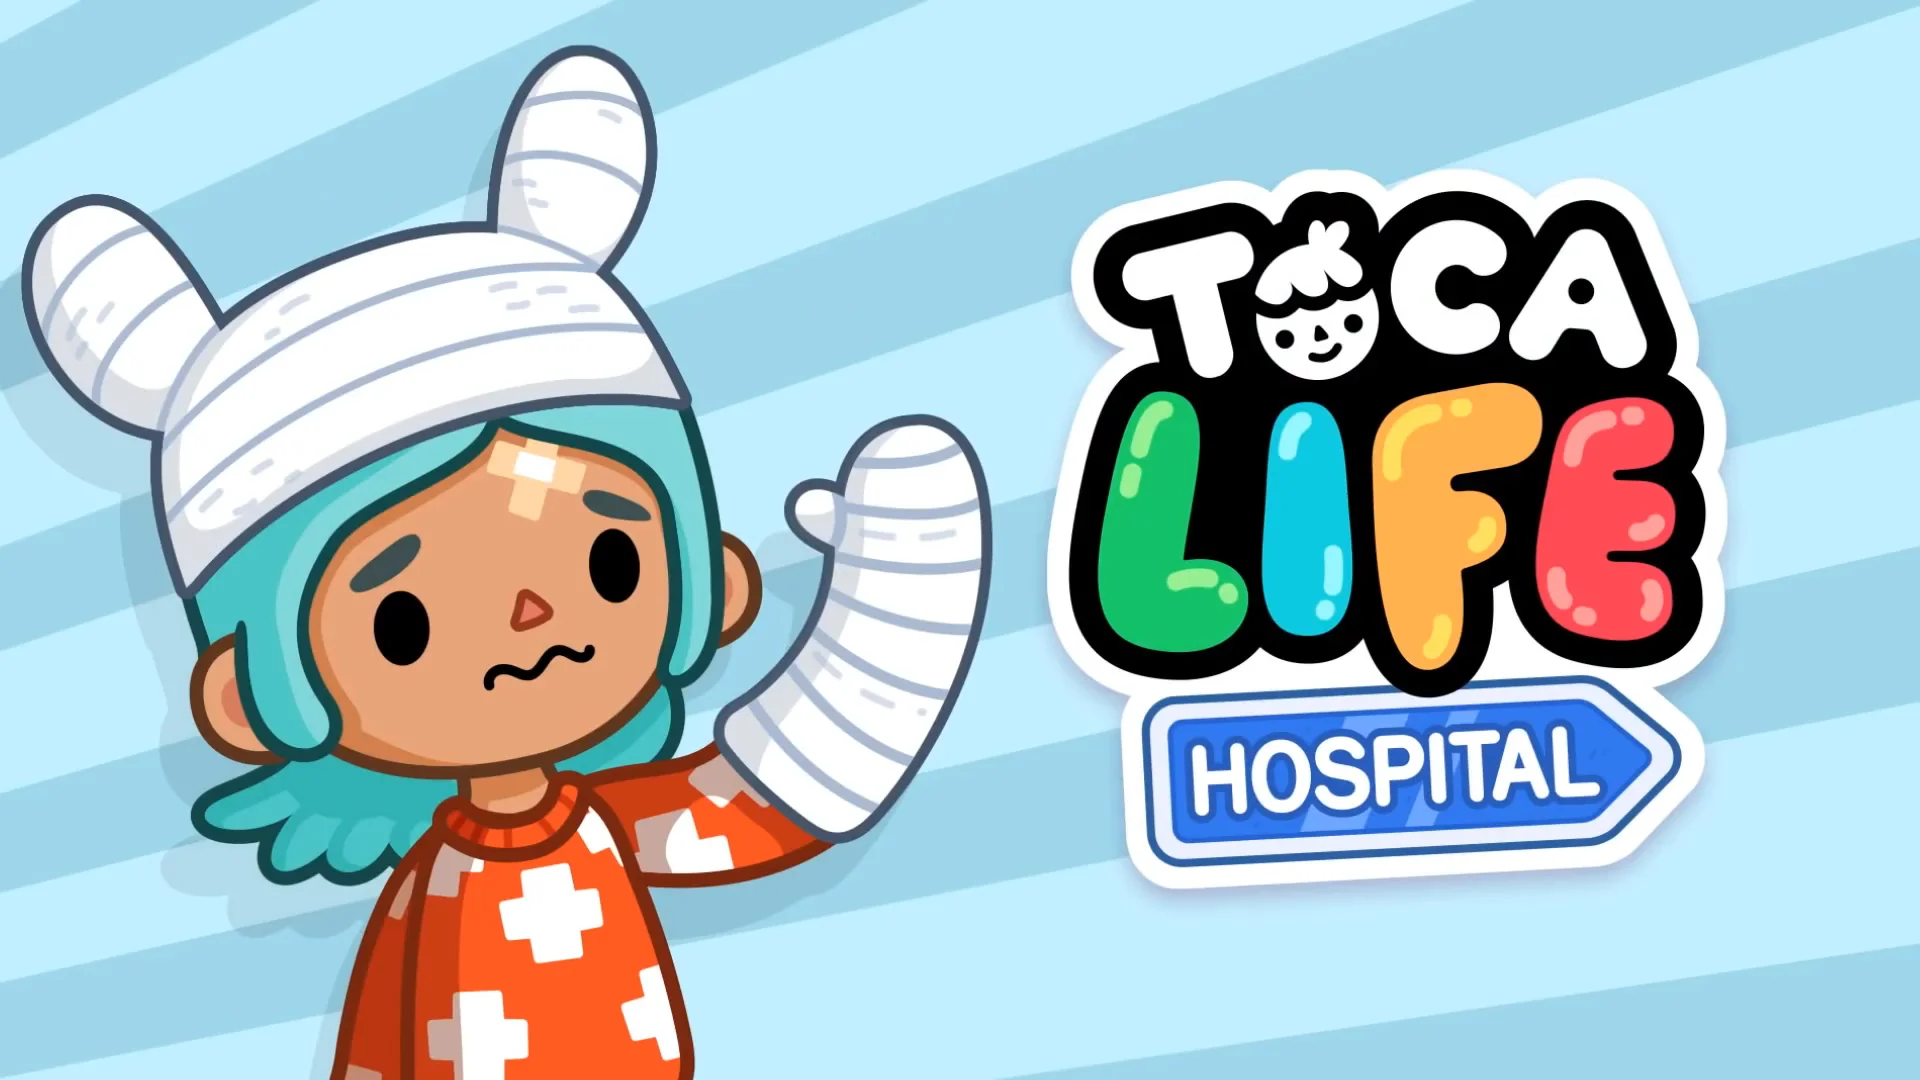 Watch Toca Life Stories Streaming Online